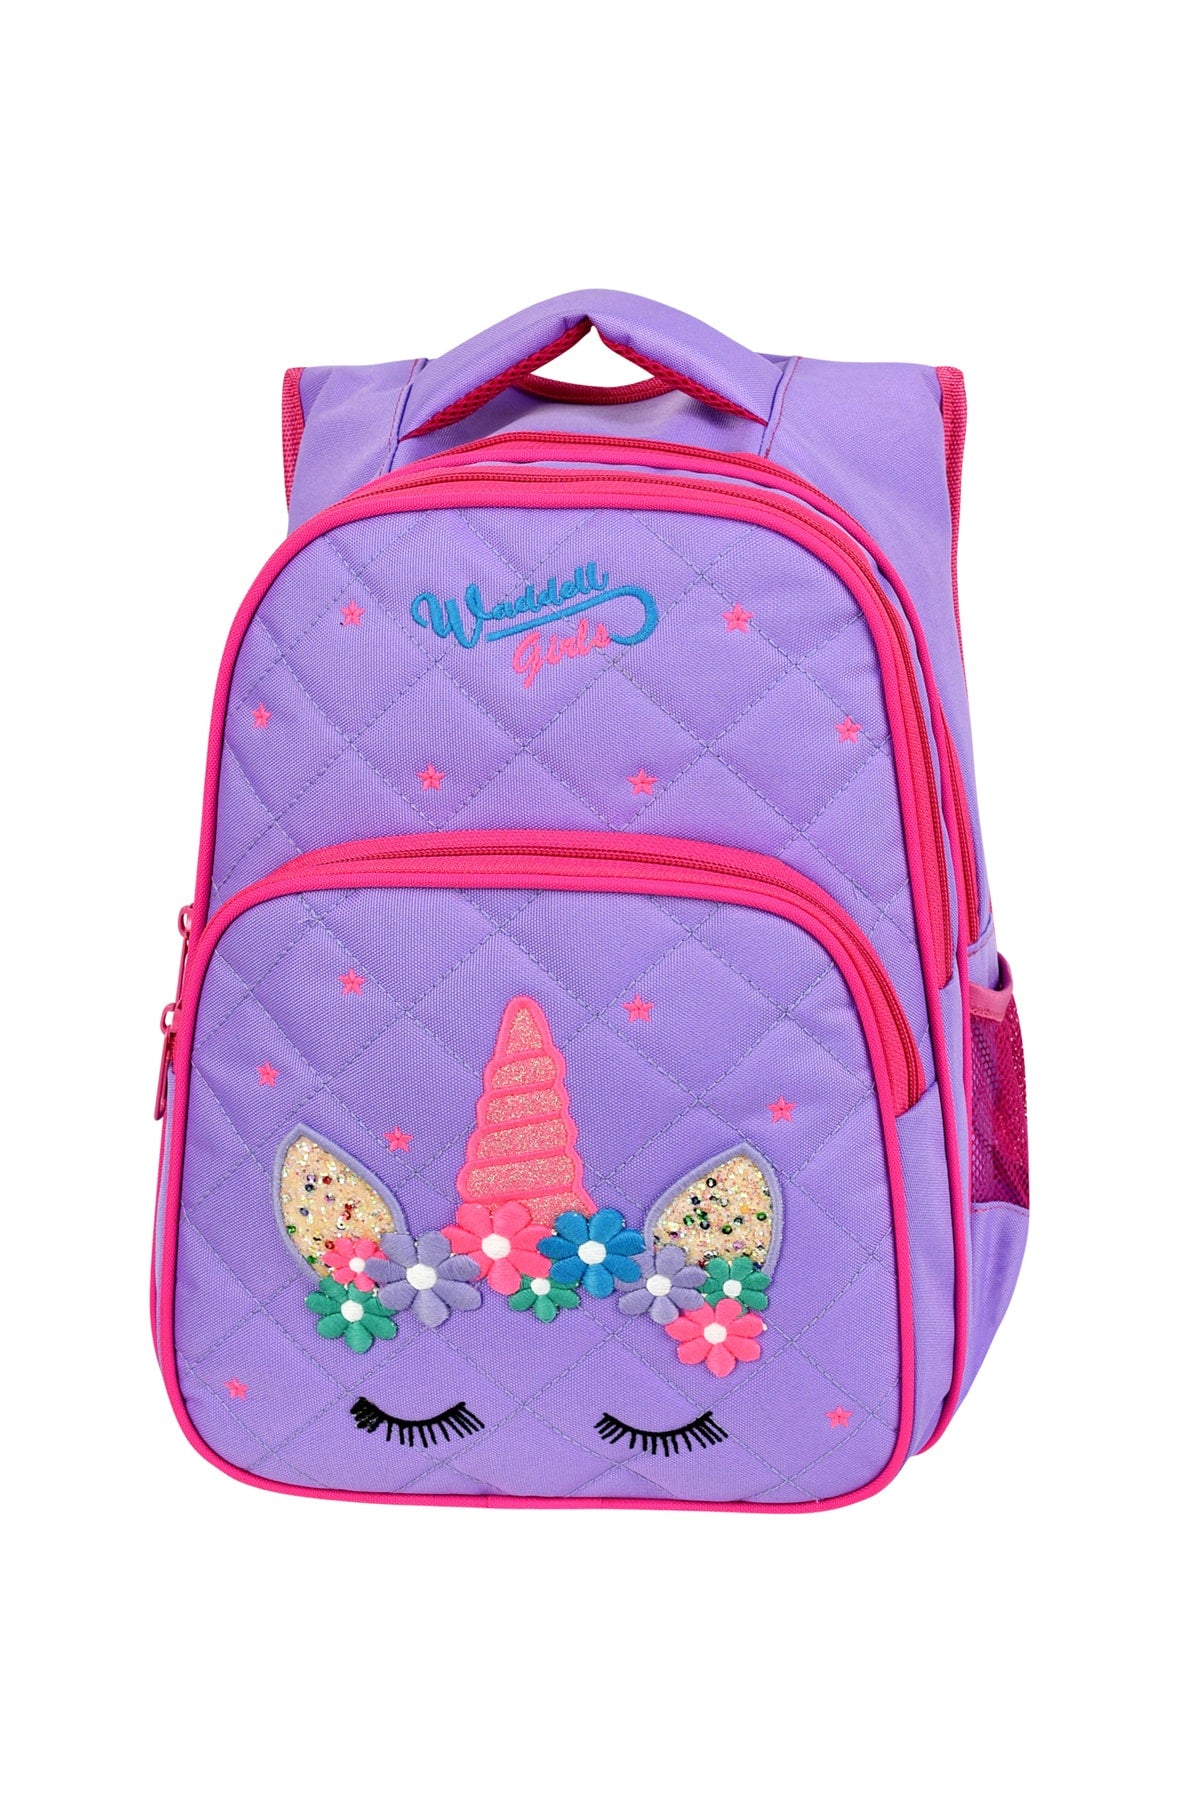 Licensed Unicorn Embroidered Primary School Girl Backpack And Lunch Box 6006